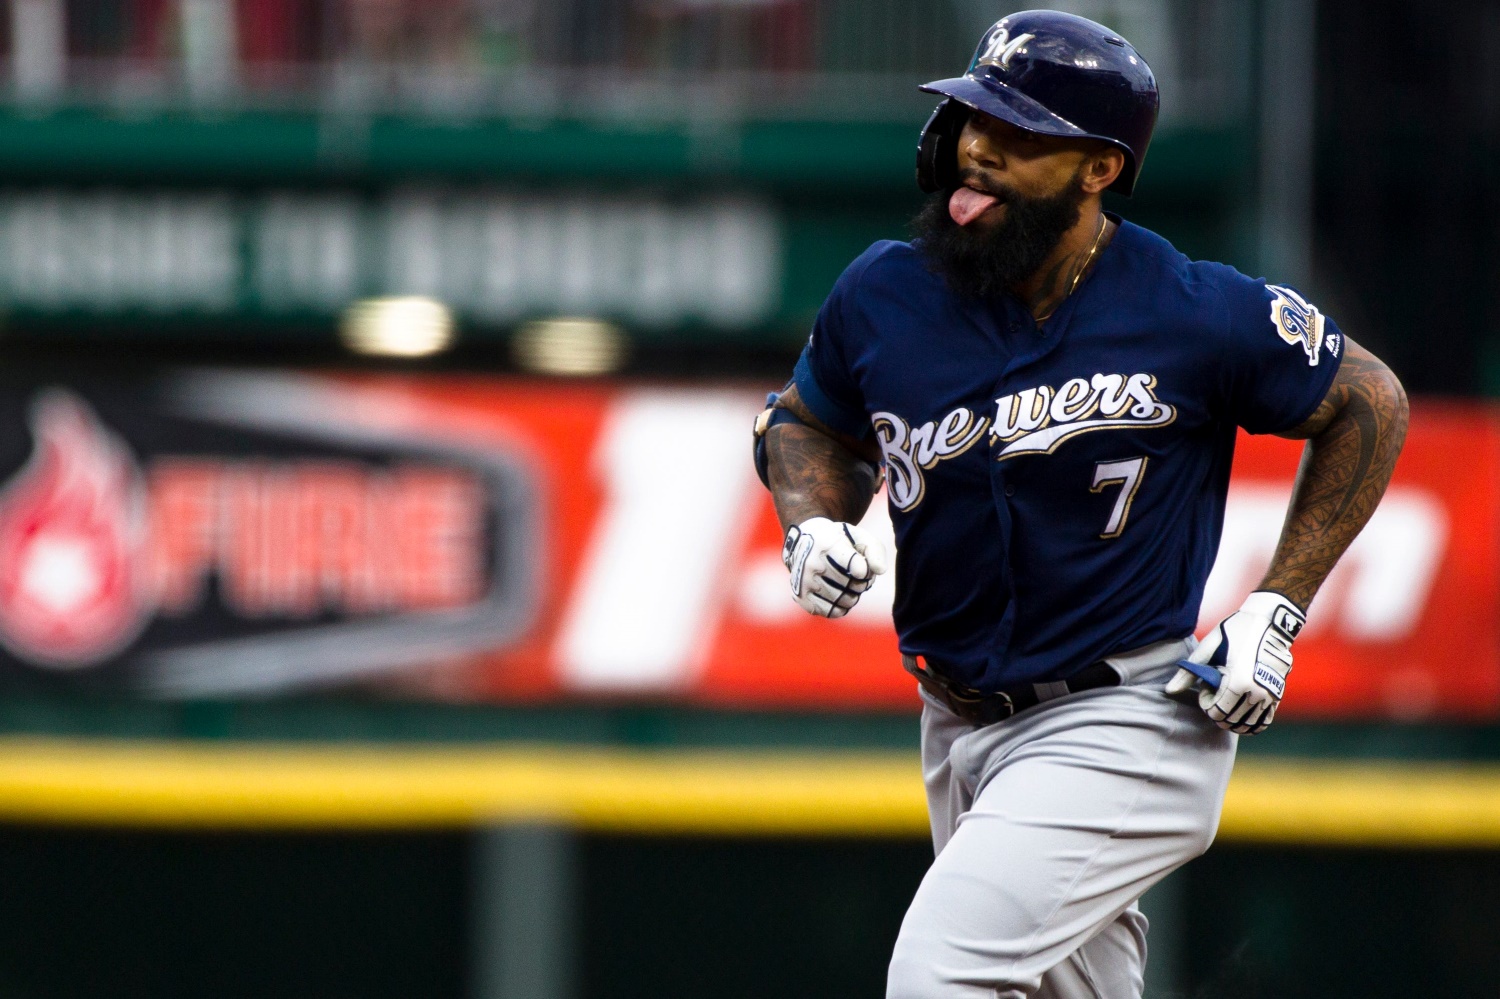 Former Brewer Eric Thames Retires: What We'll Remember About His